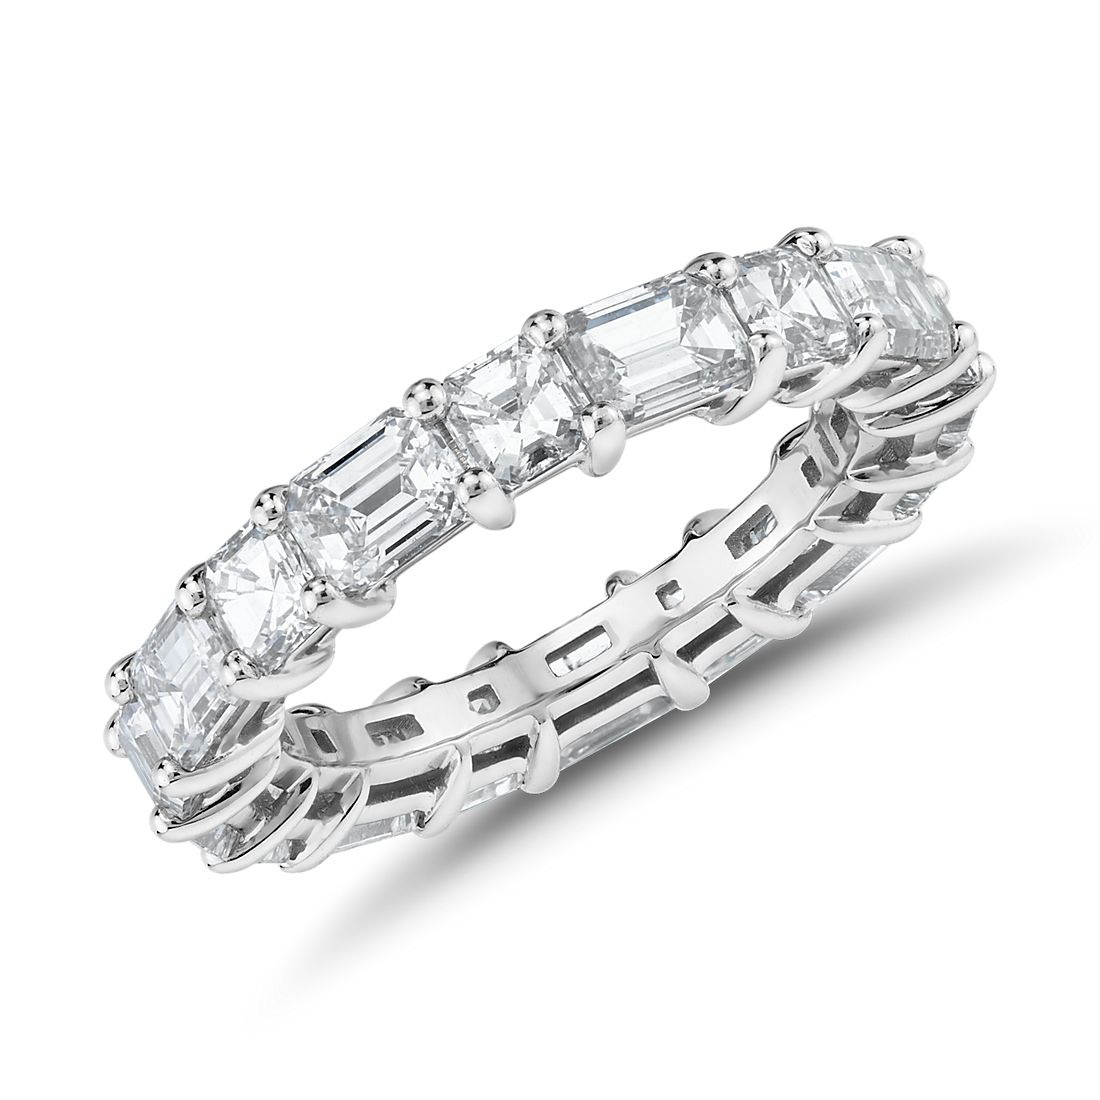 The Gallery Collection™ Emerald-Cut and Asscher-Cut Diamond Eternity Ring in Platinum (4 ct. tw.)